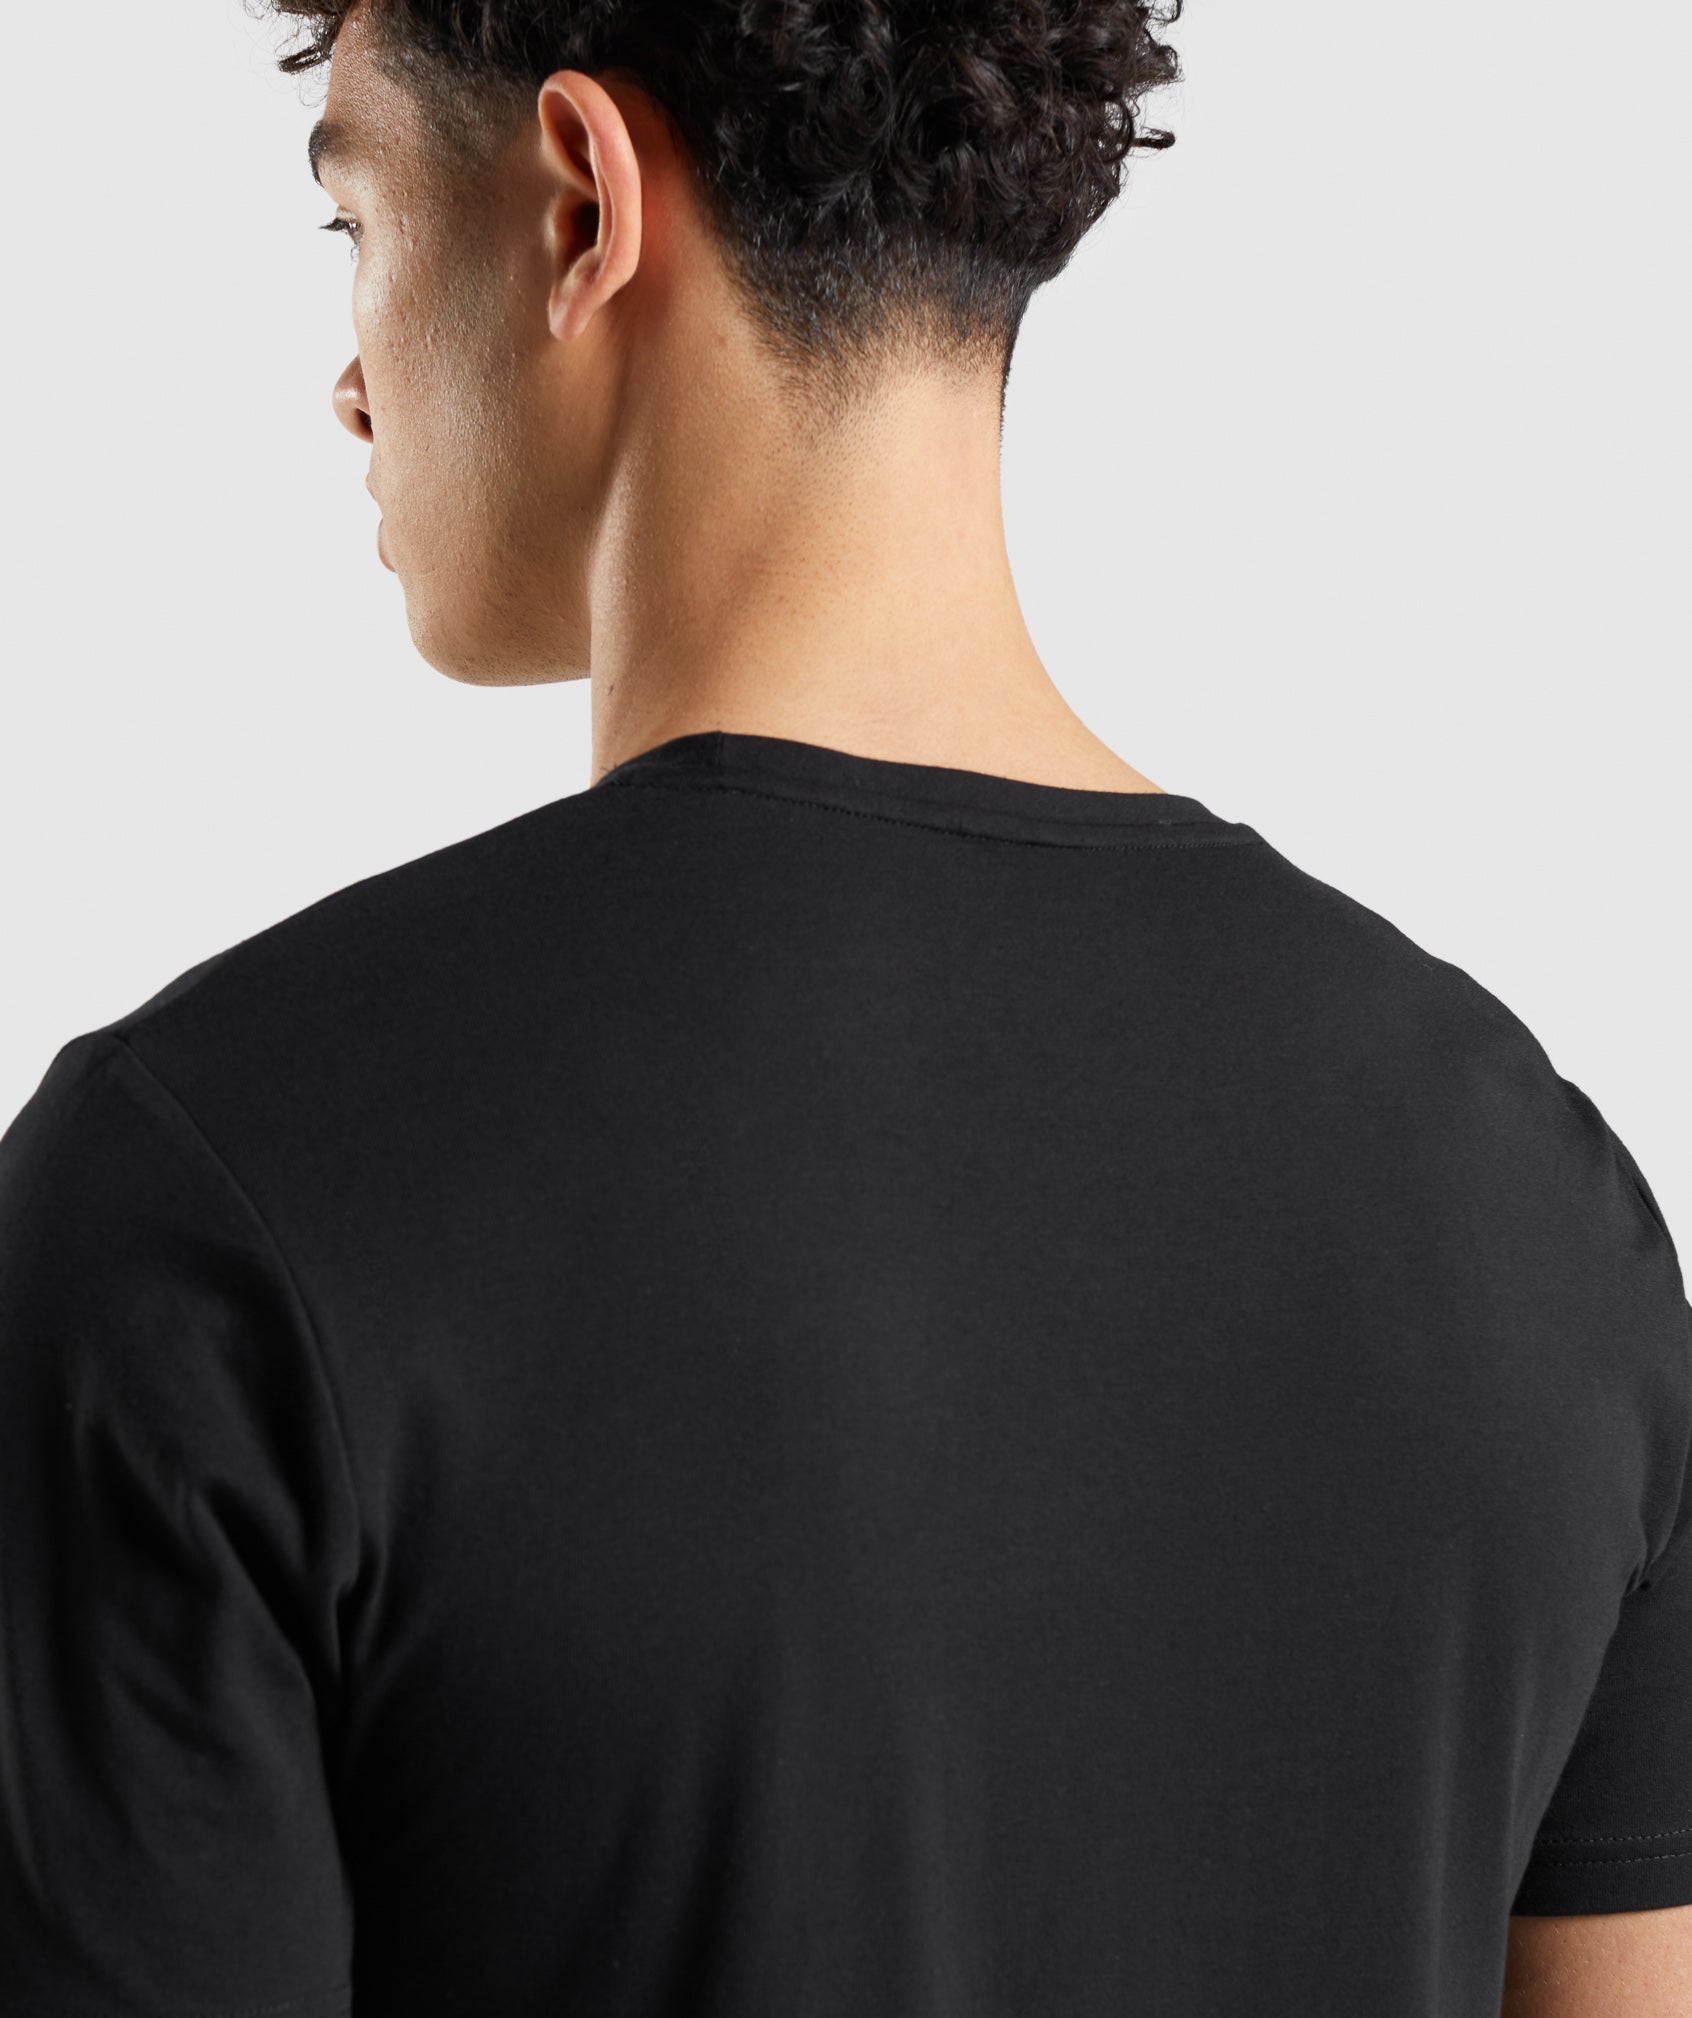 Essential T-Shirt in Black - view 6